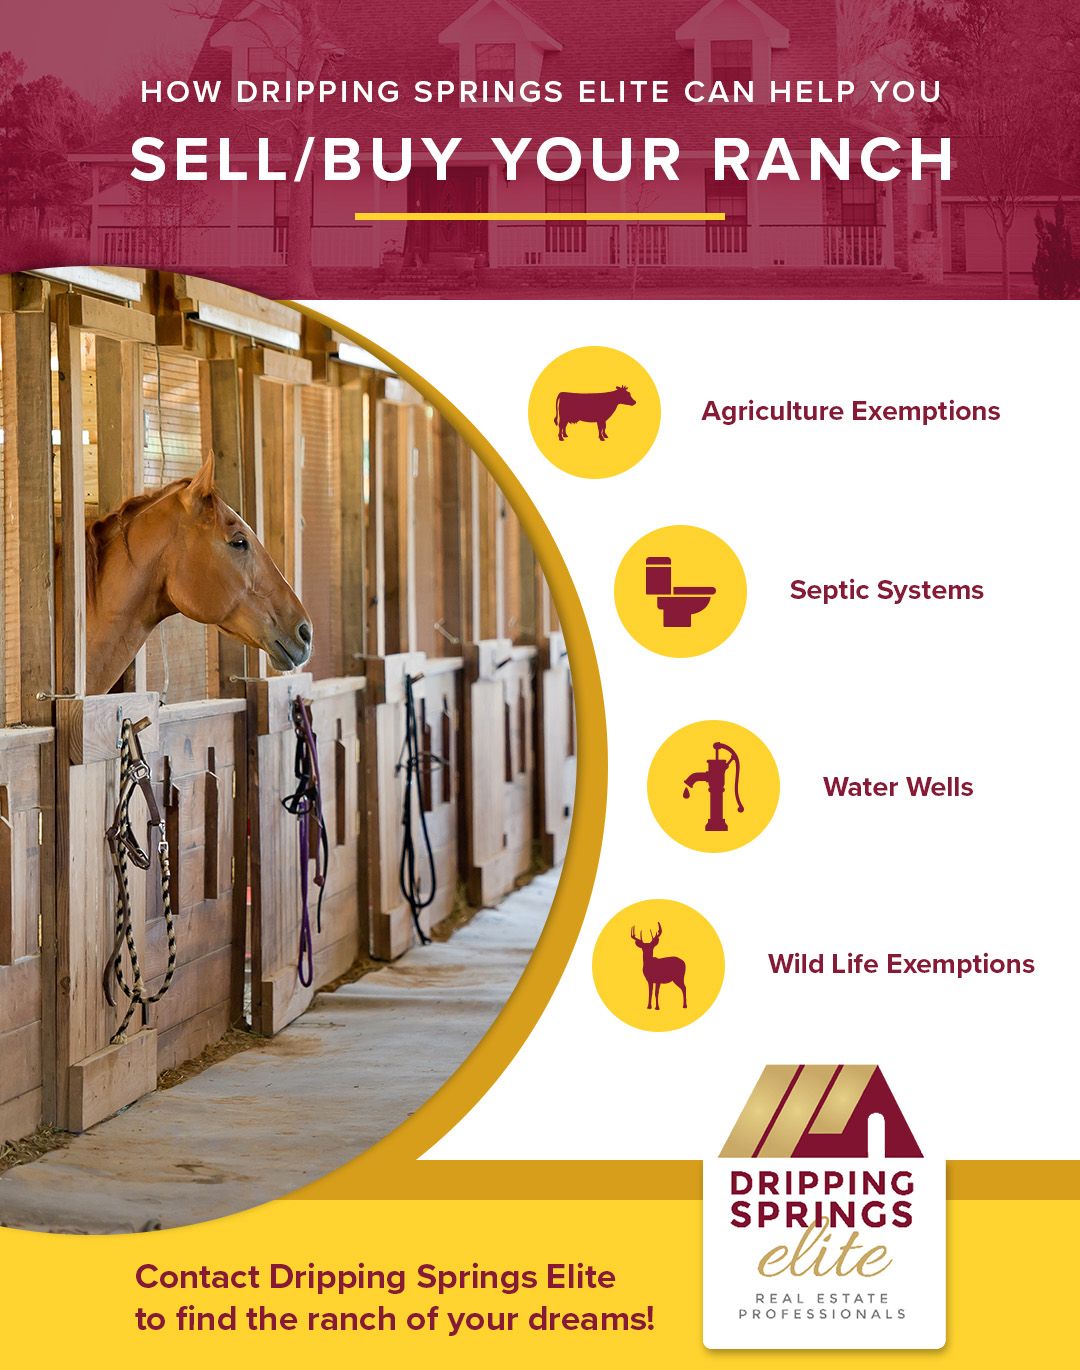 How Dripping Springs Elite can help sellbuy your ranch-infographic rv.jpg